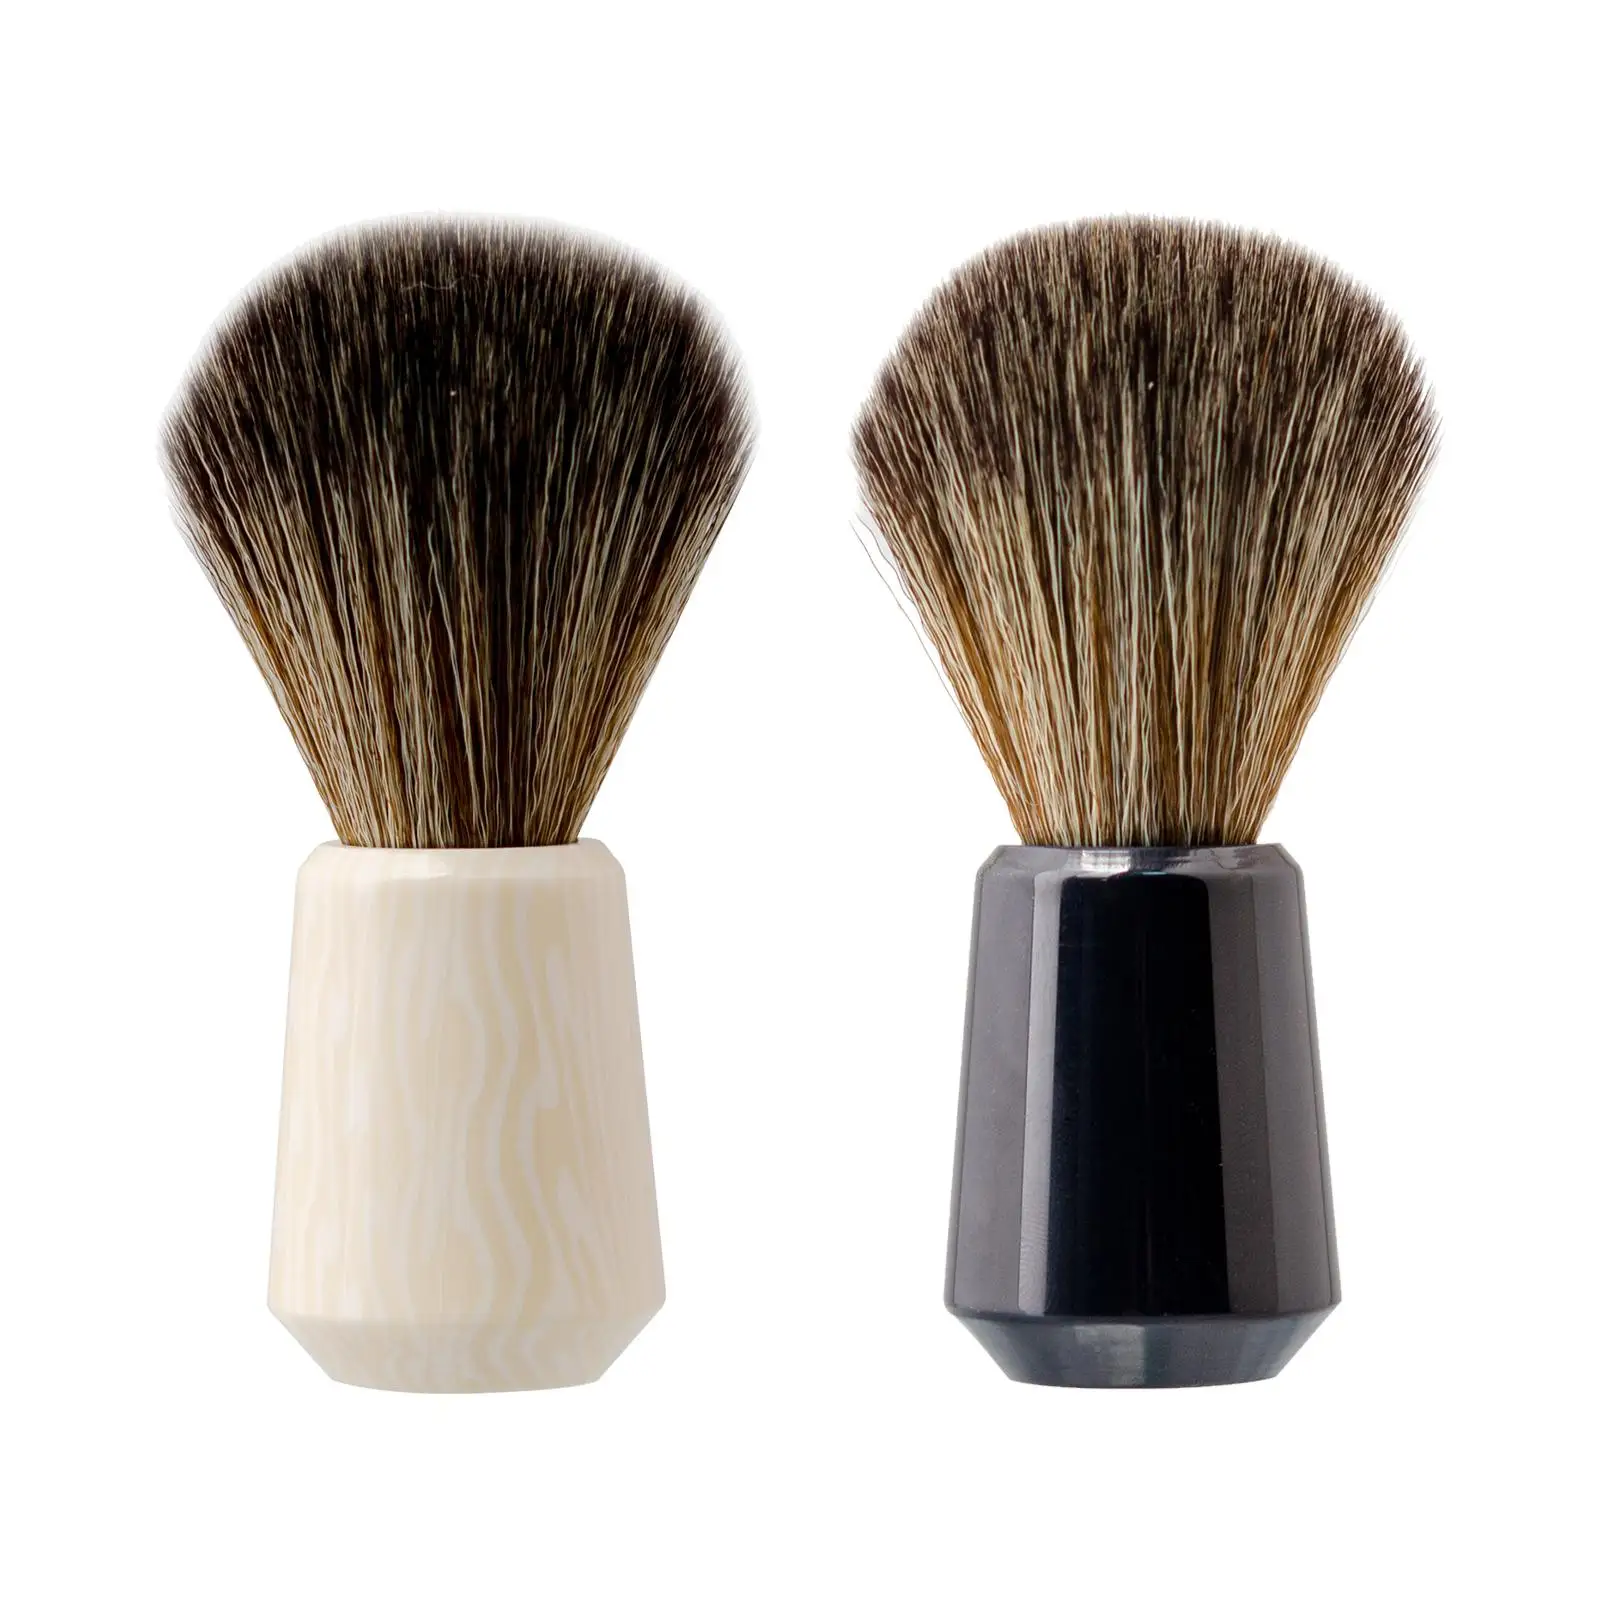 Shaving Brush Easy Foaming Accessories Father Day Gifts Lightweight Resin Handle Nylon Bristles for Barbershop Salon Home Travel